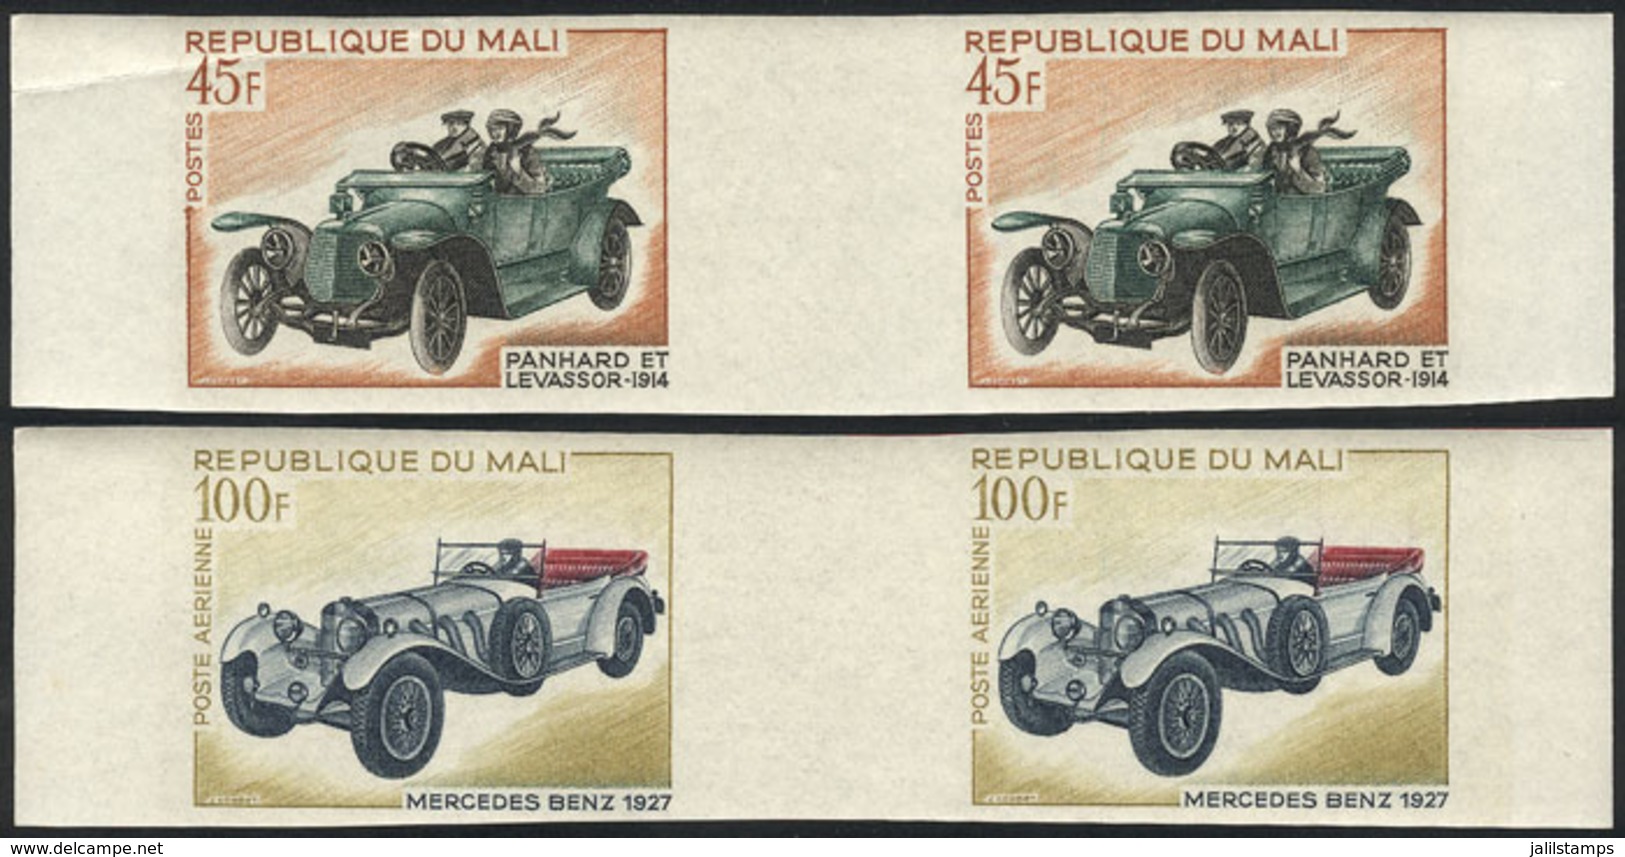 MALI: Yvert 114 + 61, 1968 Old Cars, The 2 High Values Of The Set, IMPERFORATE GUTTER PAIRS, The 45Fr. Value With Minor  - Mali (1959-...)